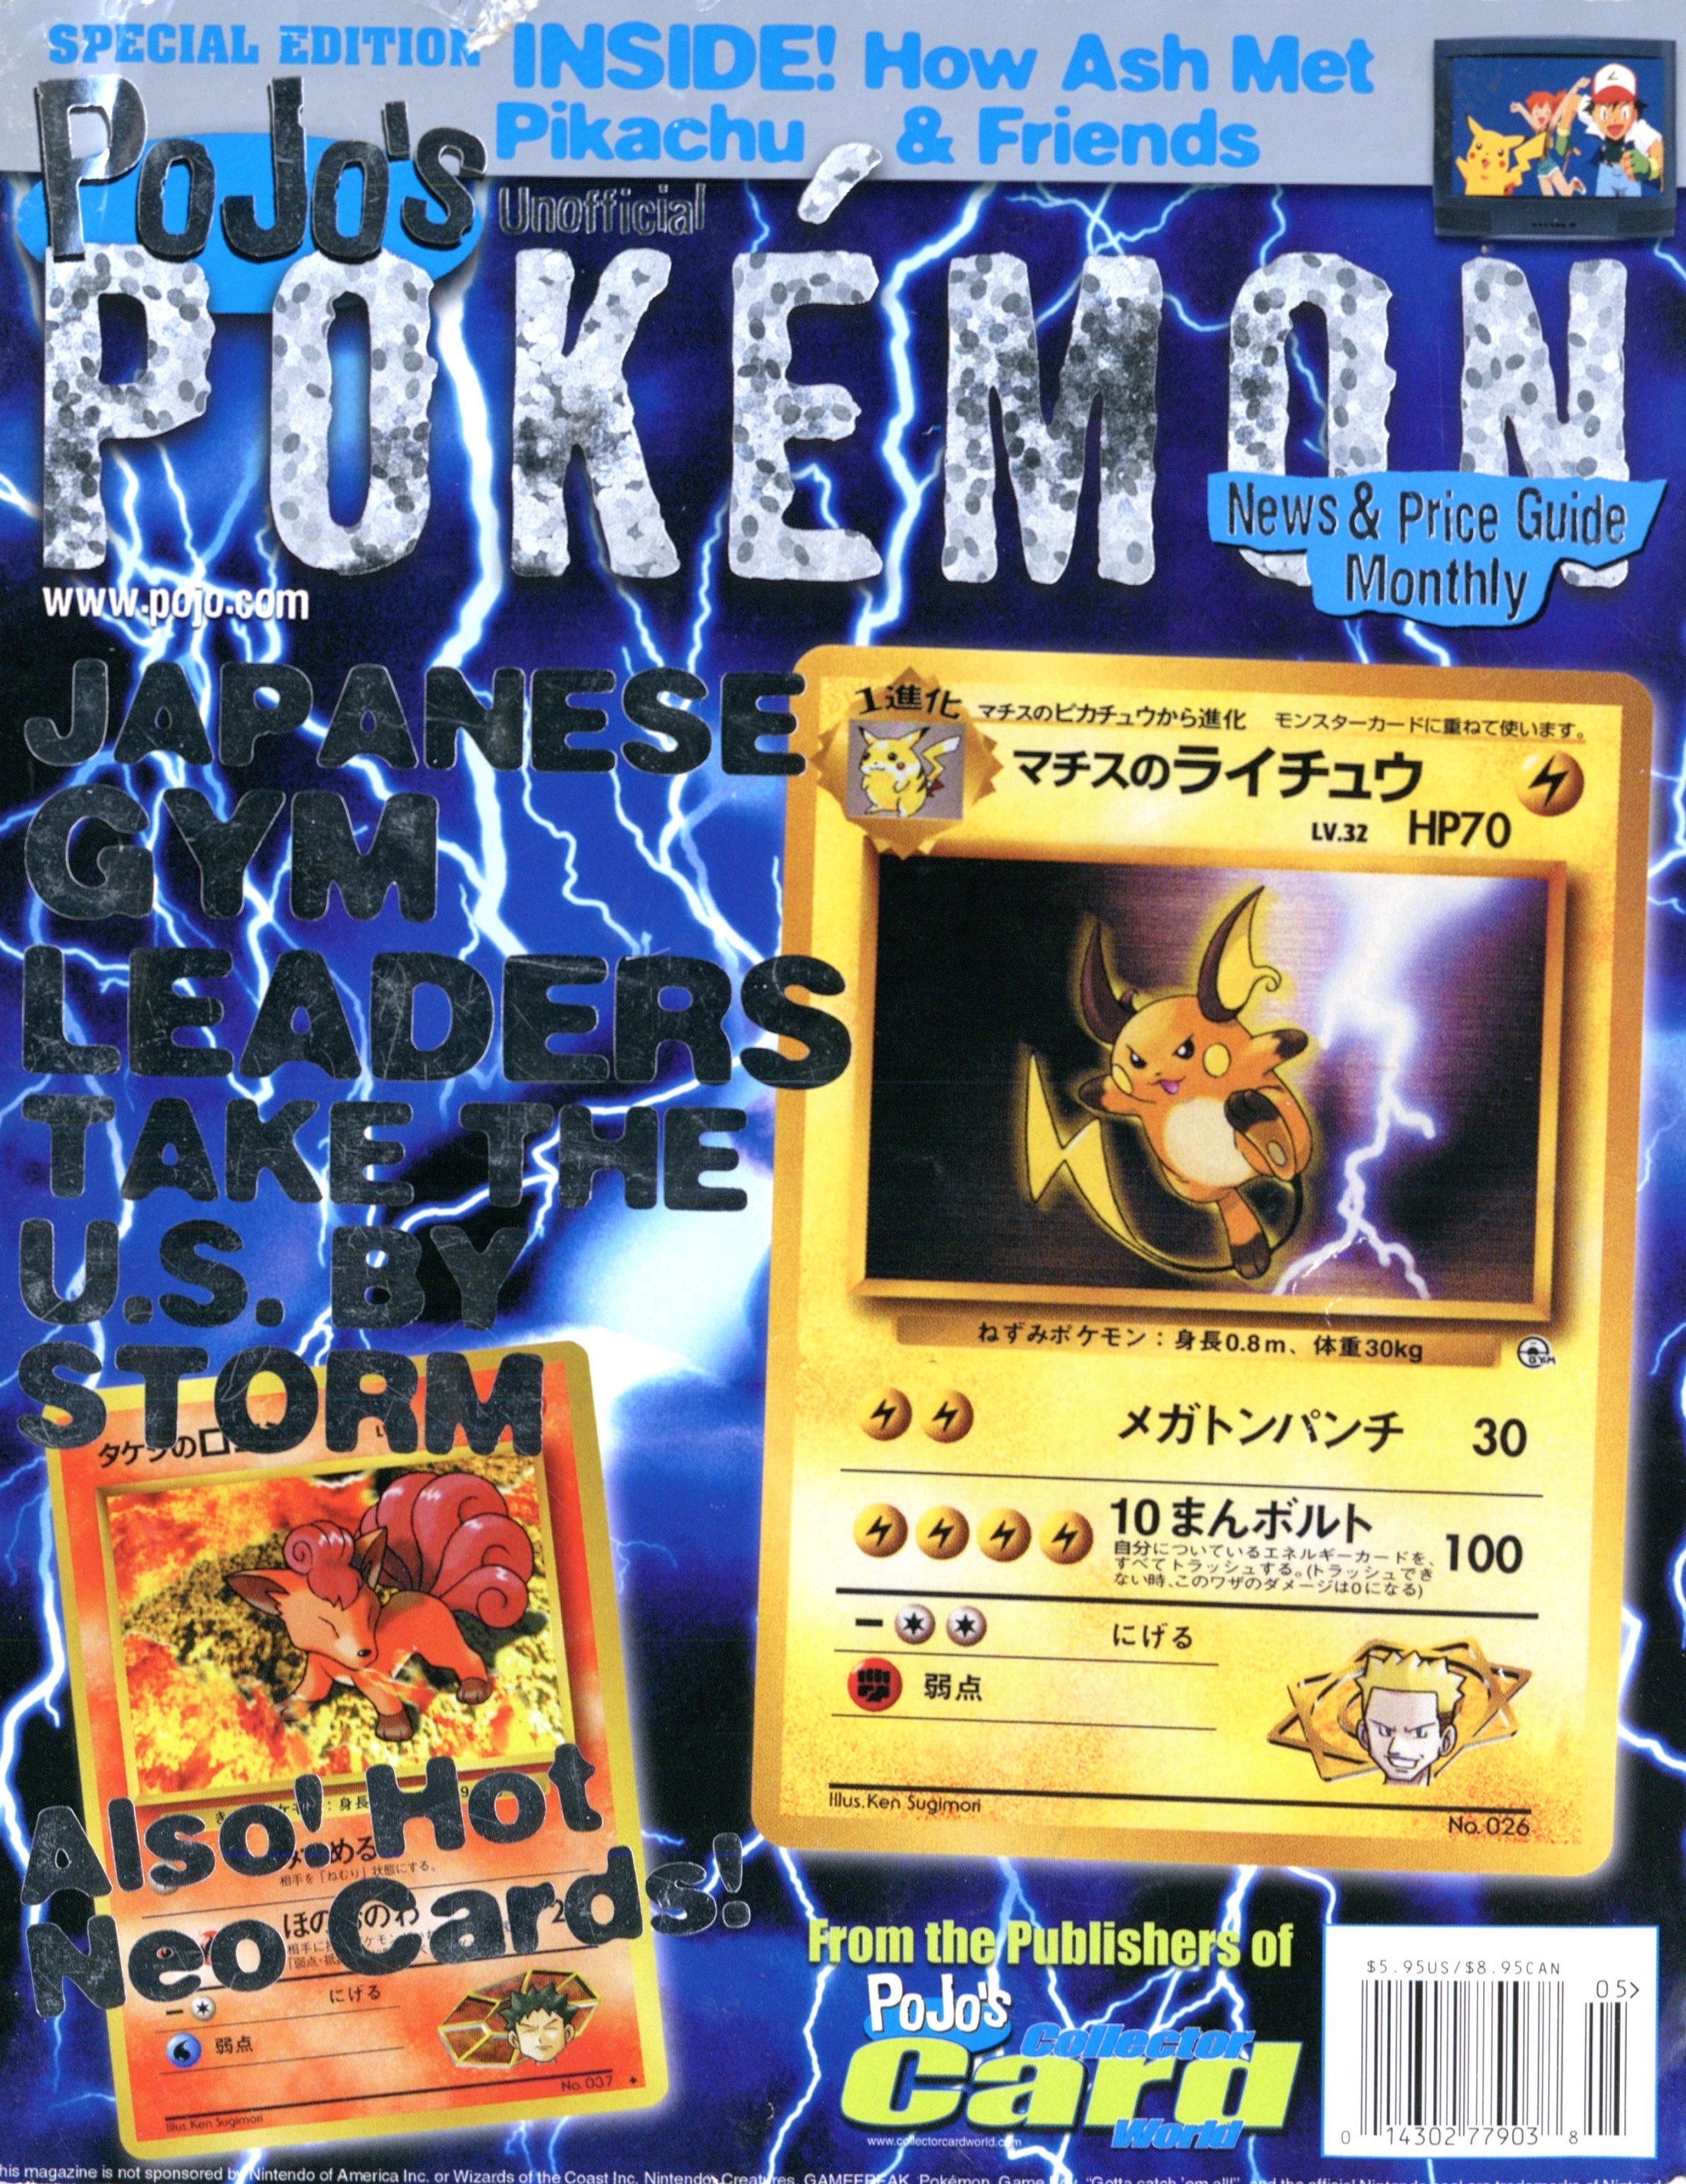 PoJo's Unofficial Pokémon News & Price Guide Monthly Issue 005 (March 2000)